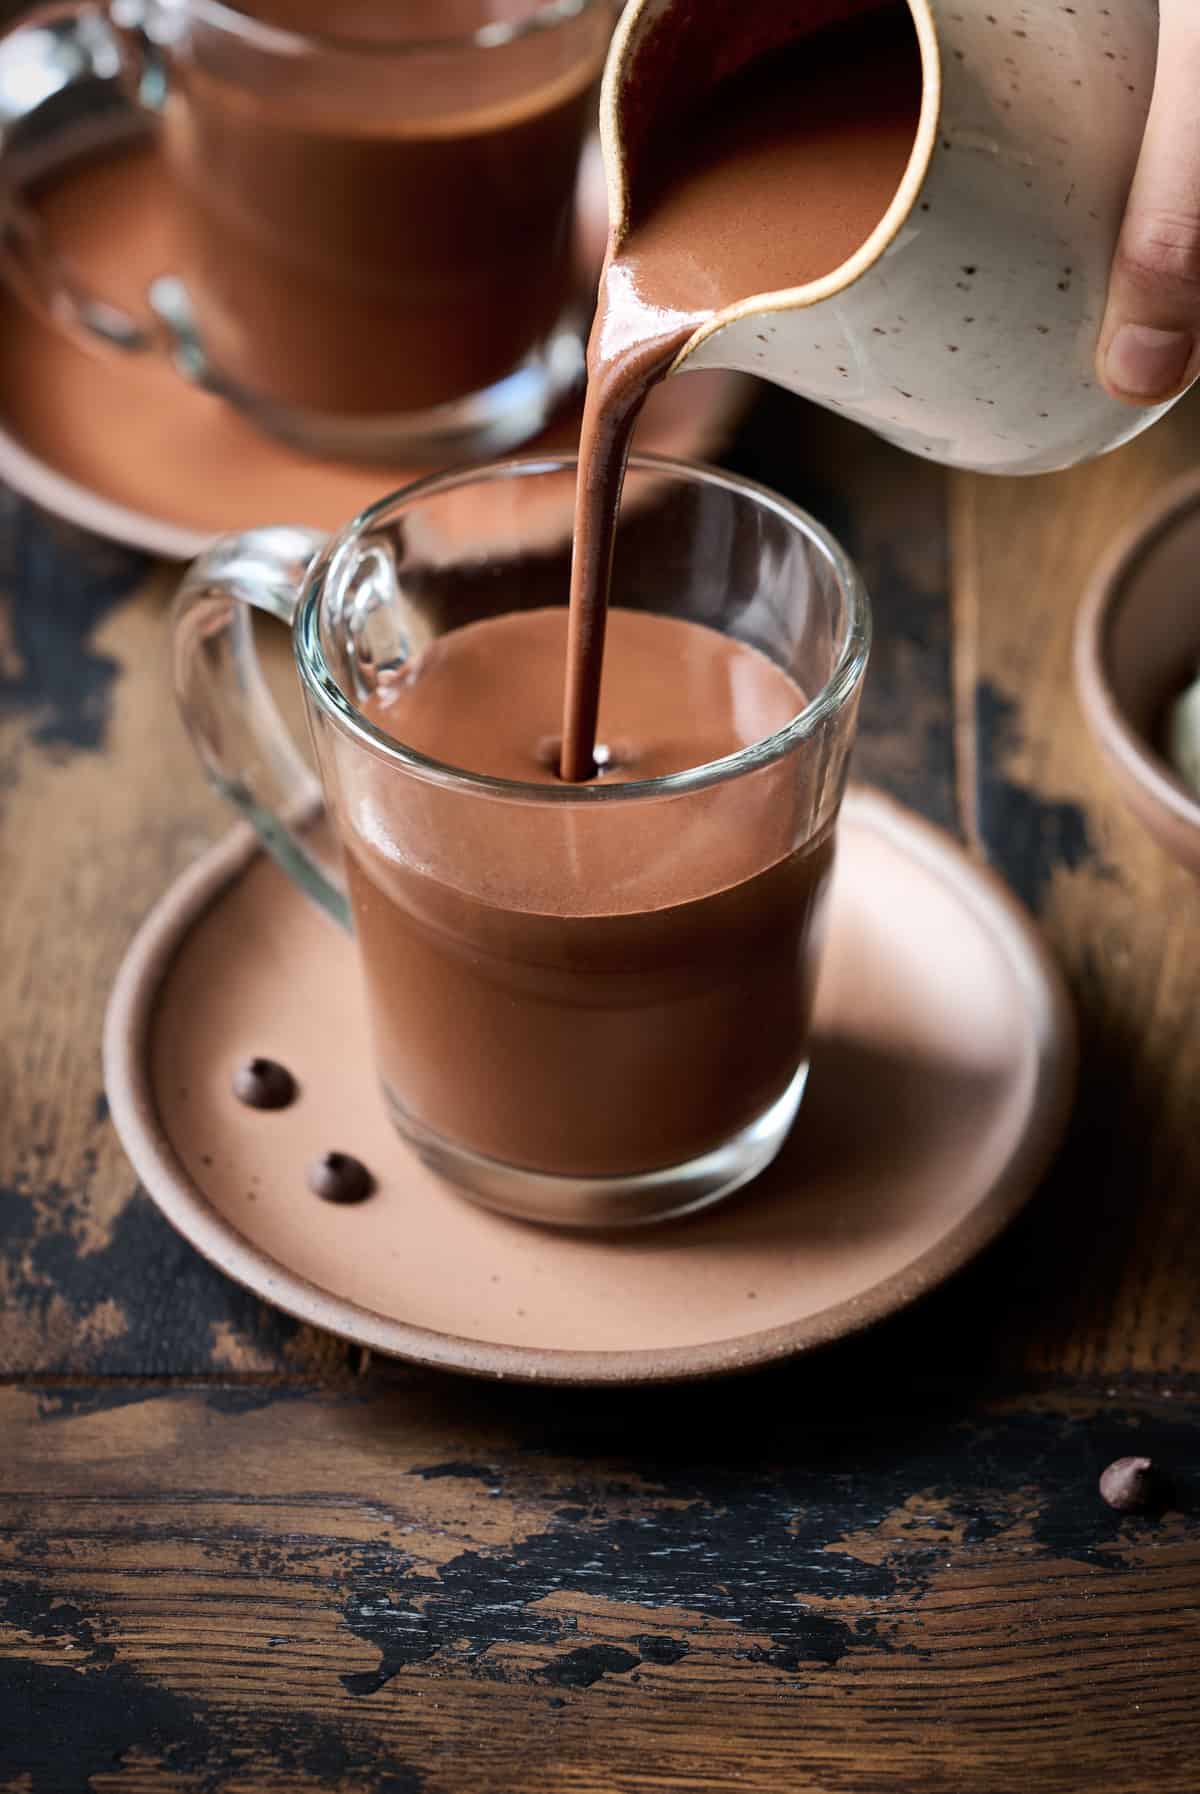 Take your hot chocolate to the next level, Chocolate